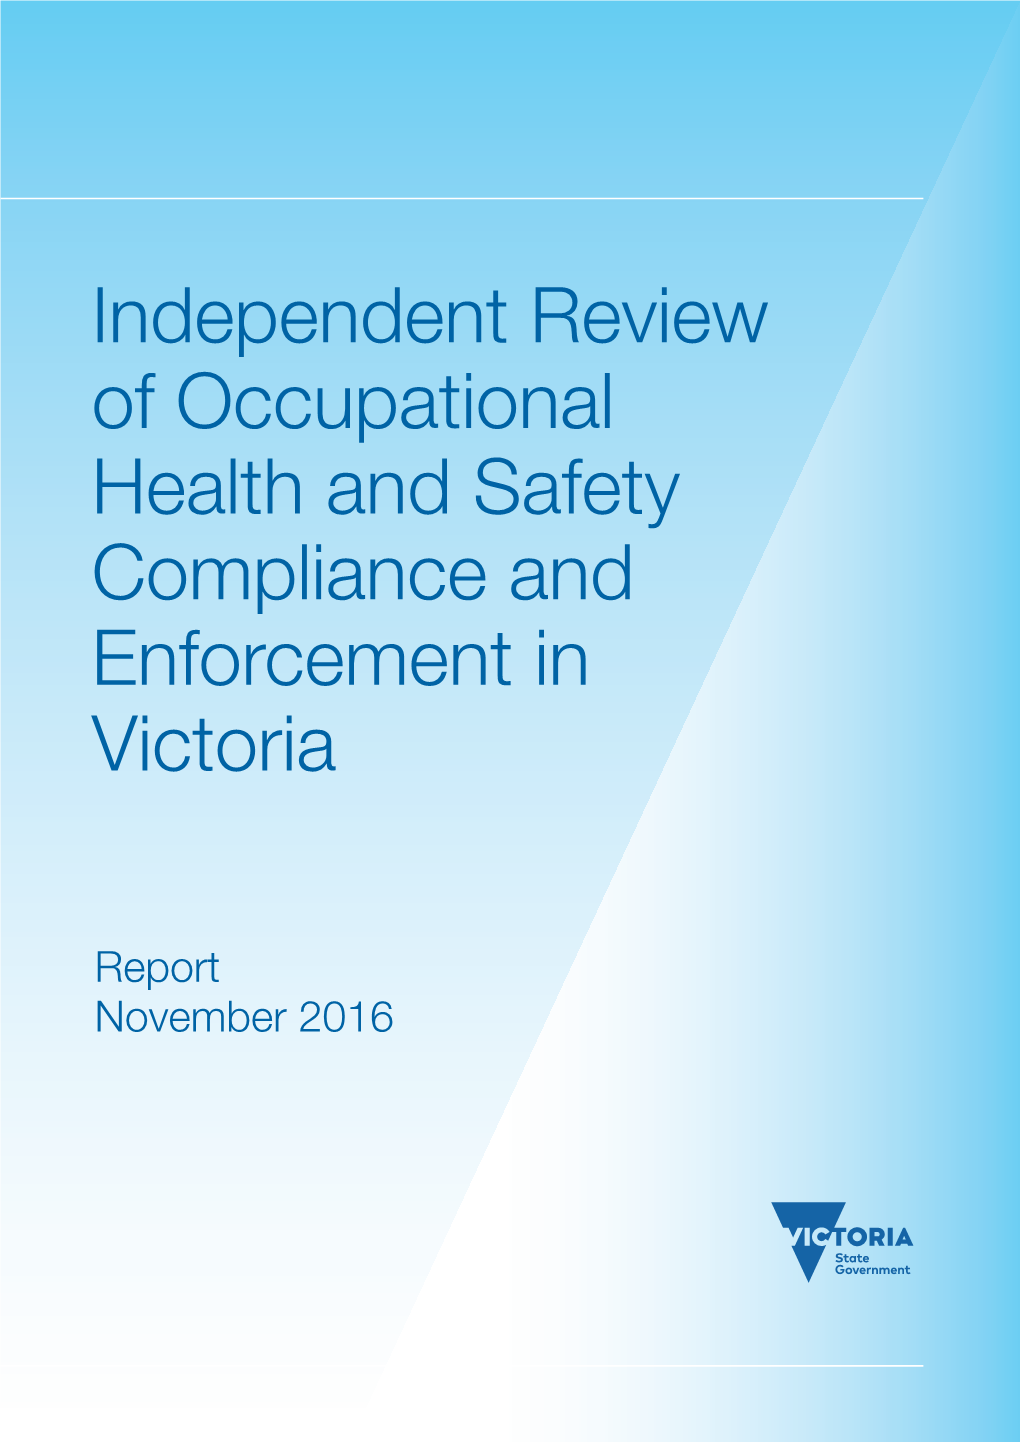 Independent Review of Occupational Health and Safety Compliance and Enforcement in Victoria